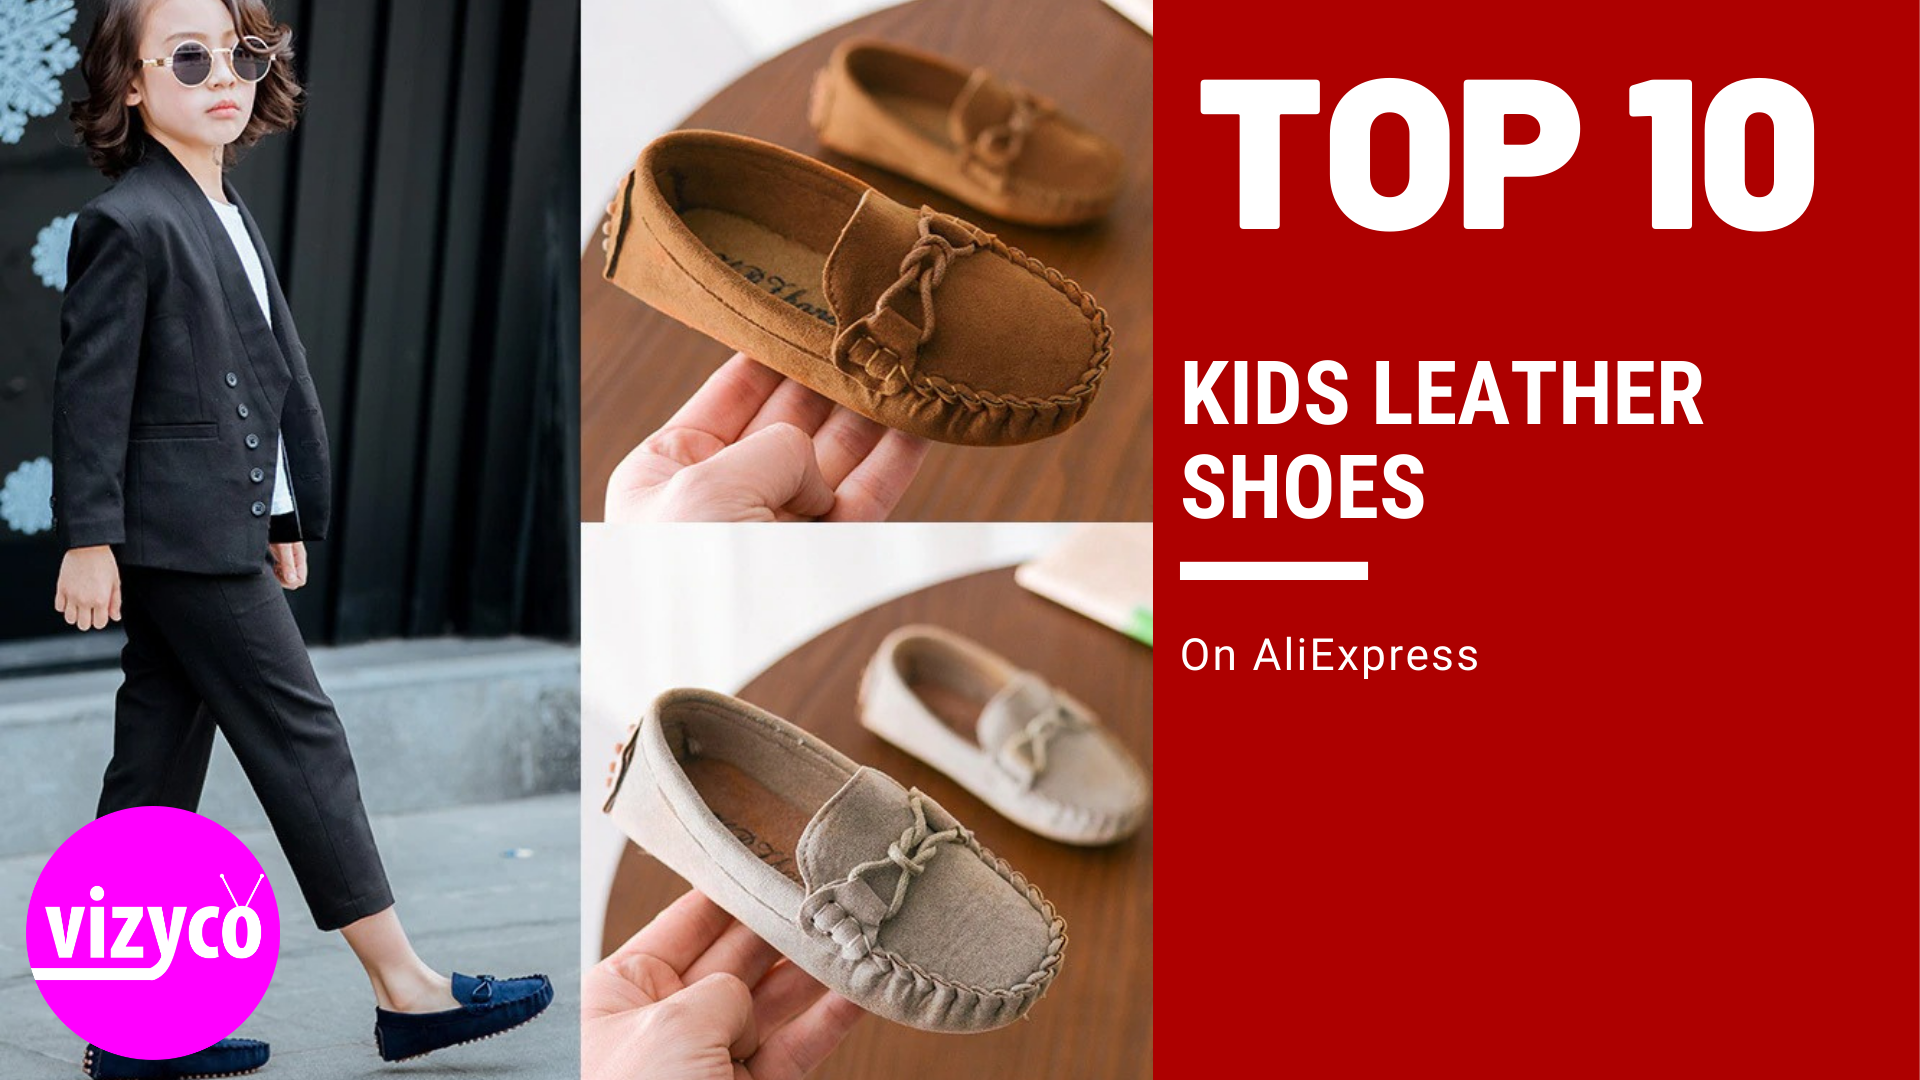 Kids Leather Shoes Tops 10! on AliExpress | vizyco